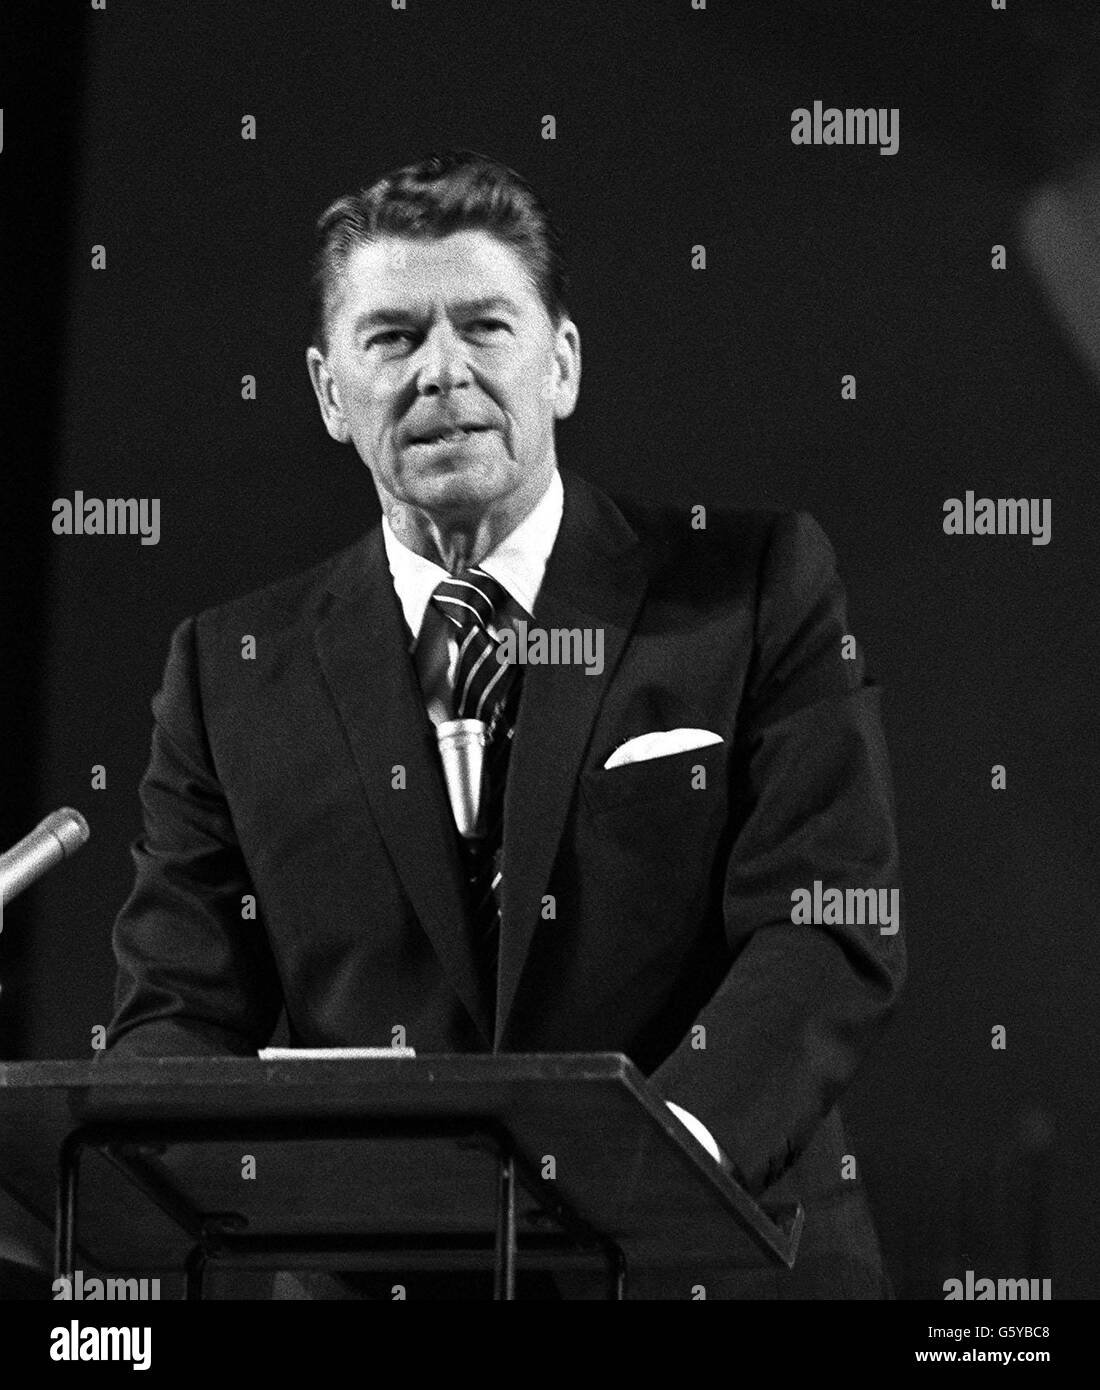 Speaking at the annual conference of the Institute of Directors at London's Royal Albert Hall is Governor Ronald Reagan of the State of California. Governor Reagan, a former Hollywood film star, addressed the conference on the subject 'The New Noblesse Oblige'. Stock Photo